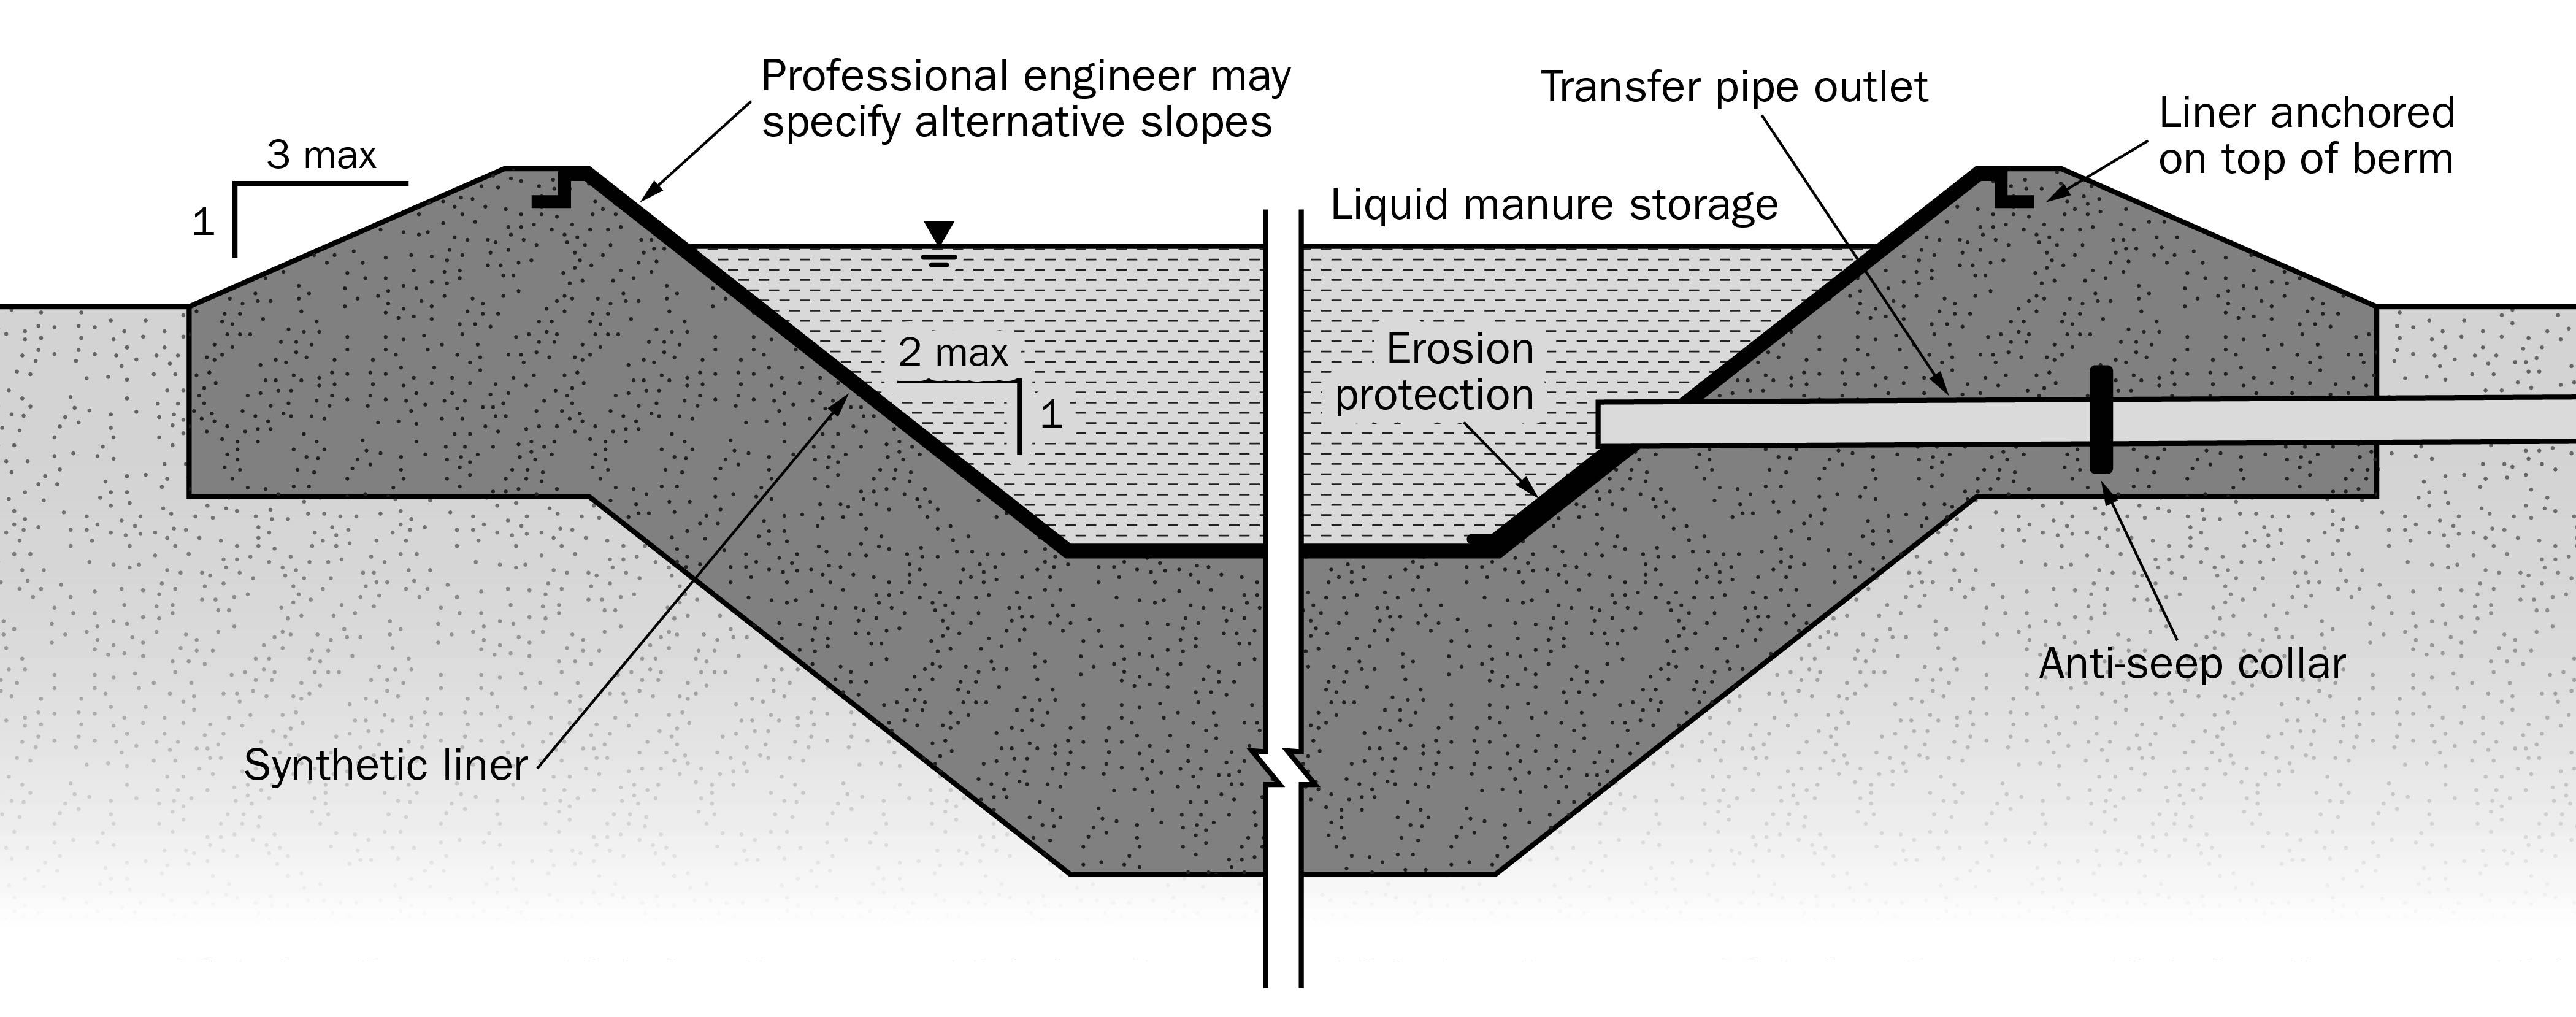 A drawing showing a cross-section of an earthen manure storage with a synthetic liner.